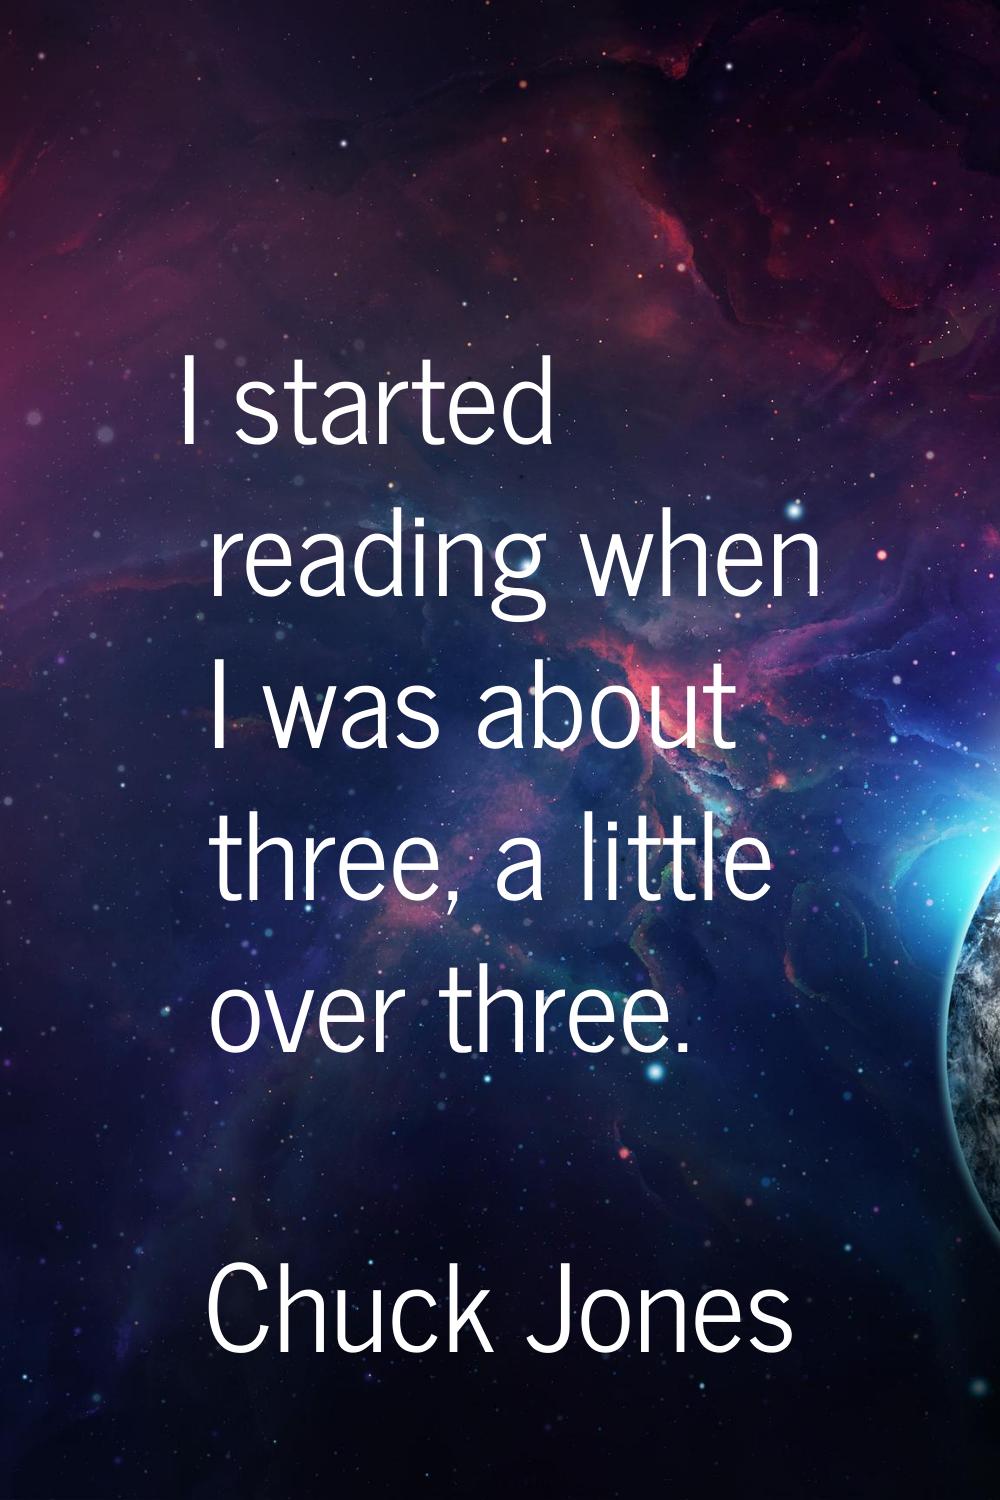 I started reading when I was about three, a little over three.